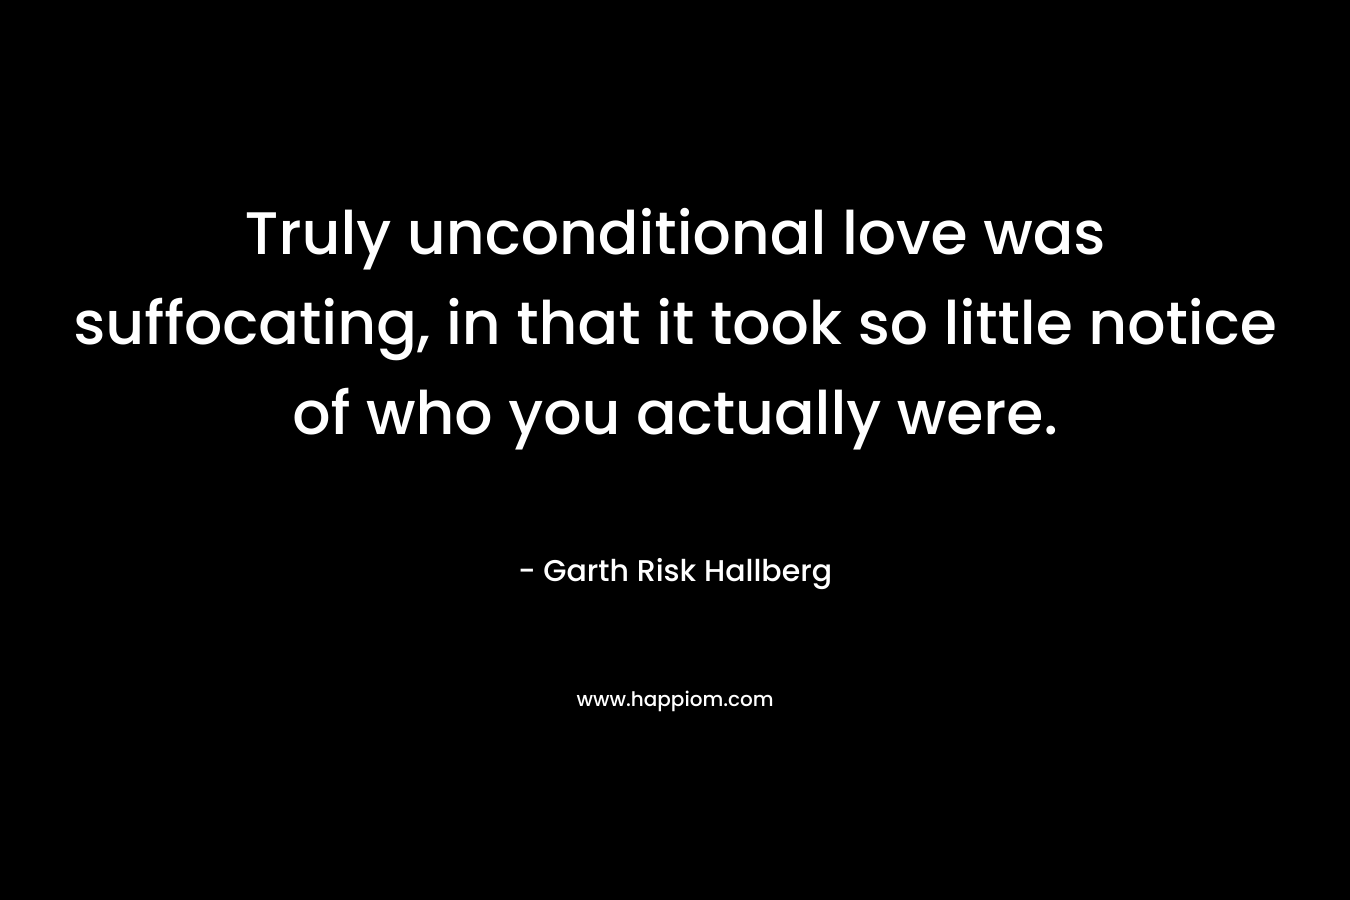 Truly unconditional love was suffocating, in that it took so little notice of who you actually were. – Garth Risk Hallberg